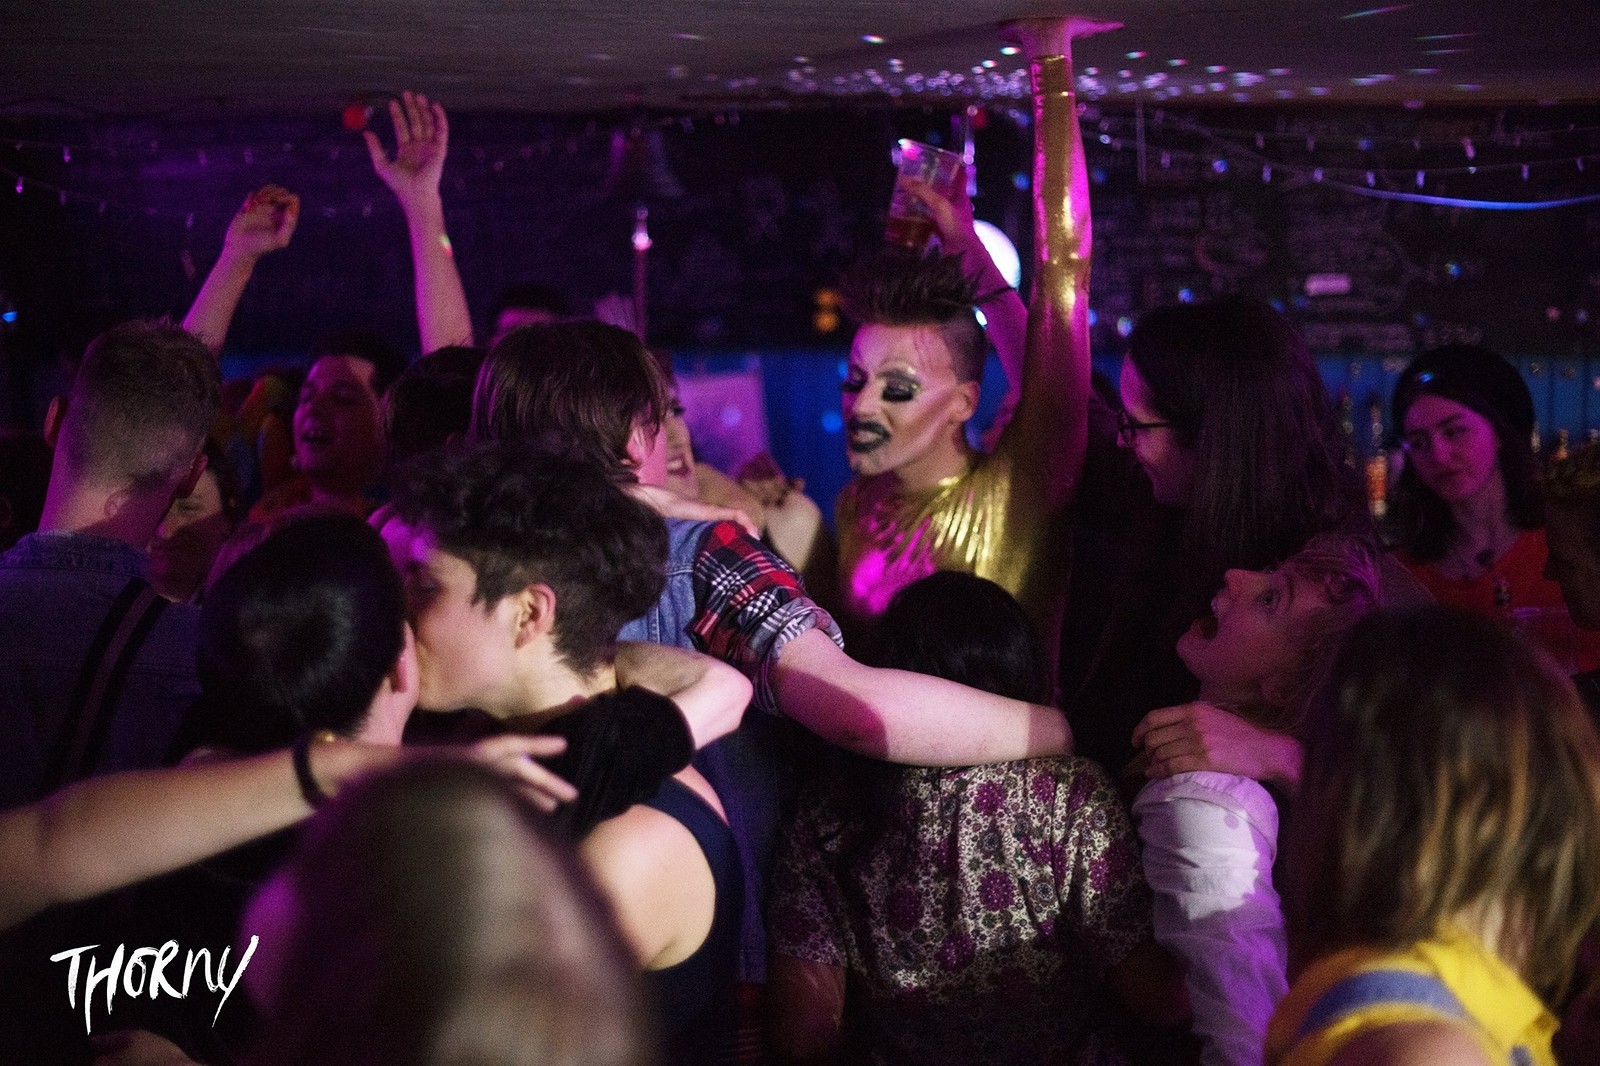 Thorny / Trans Pride South West 2018 Cabaret Night at The Brunswick Club